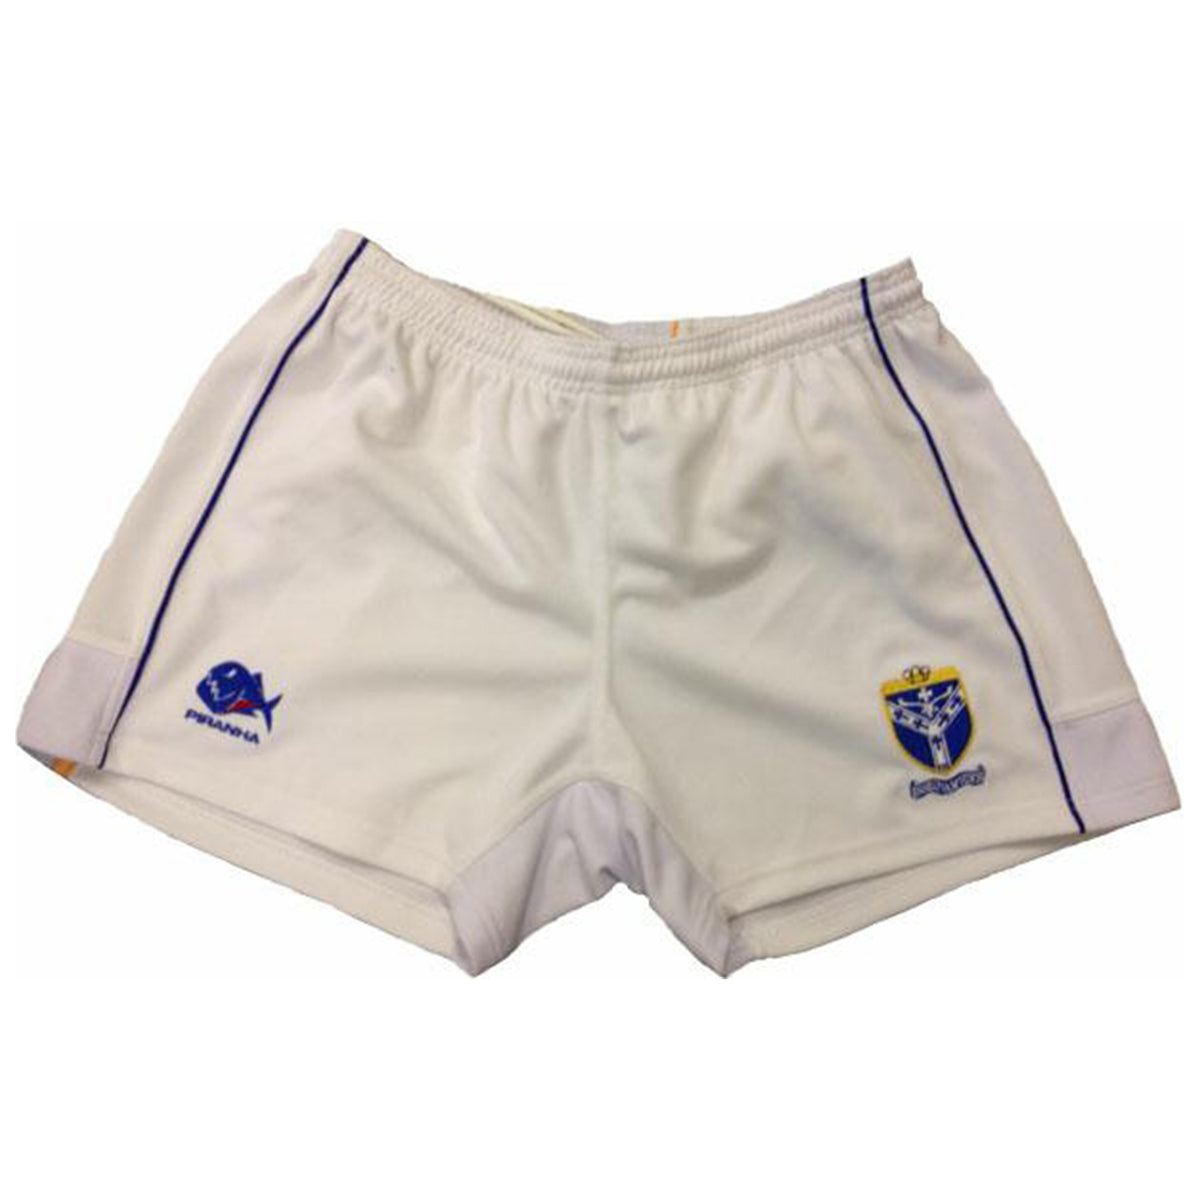 Forest School Rugby Team Shorts